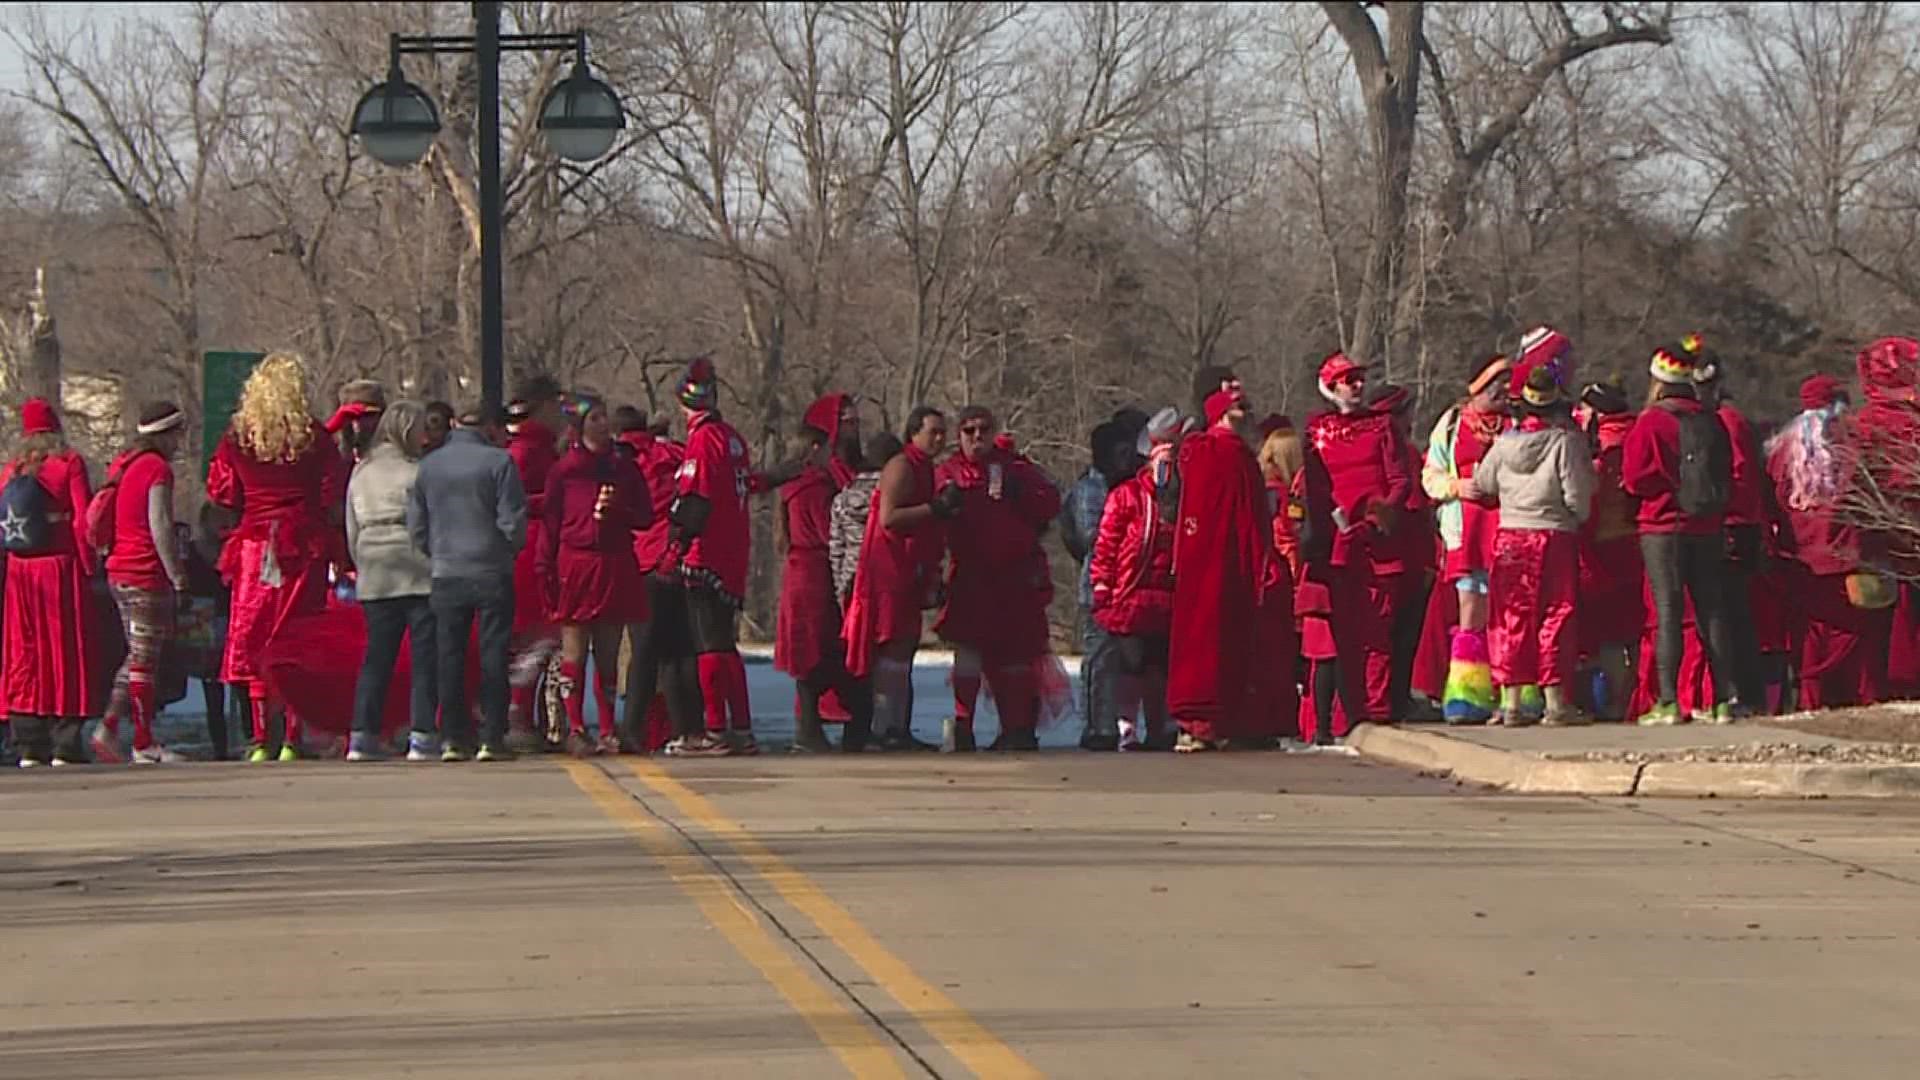 Moline streets were a sea of red Saturday afternoon during the 11th annual Red Dress Run benefitting Clock Inc.